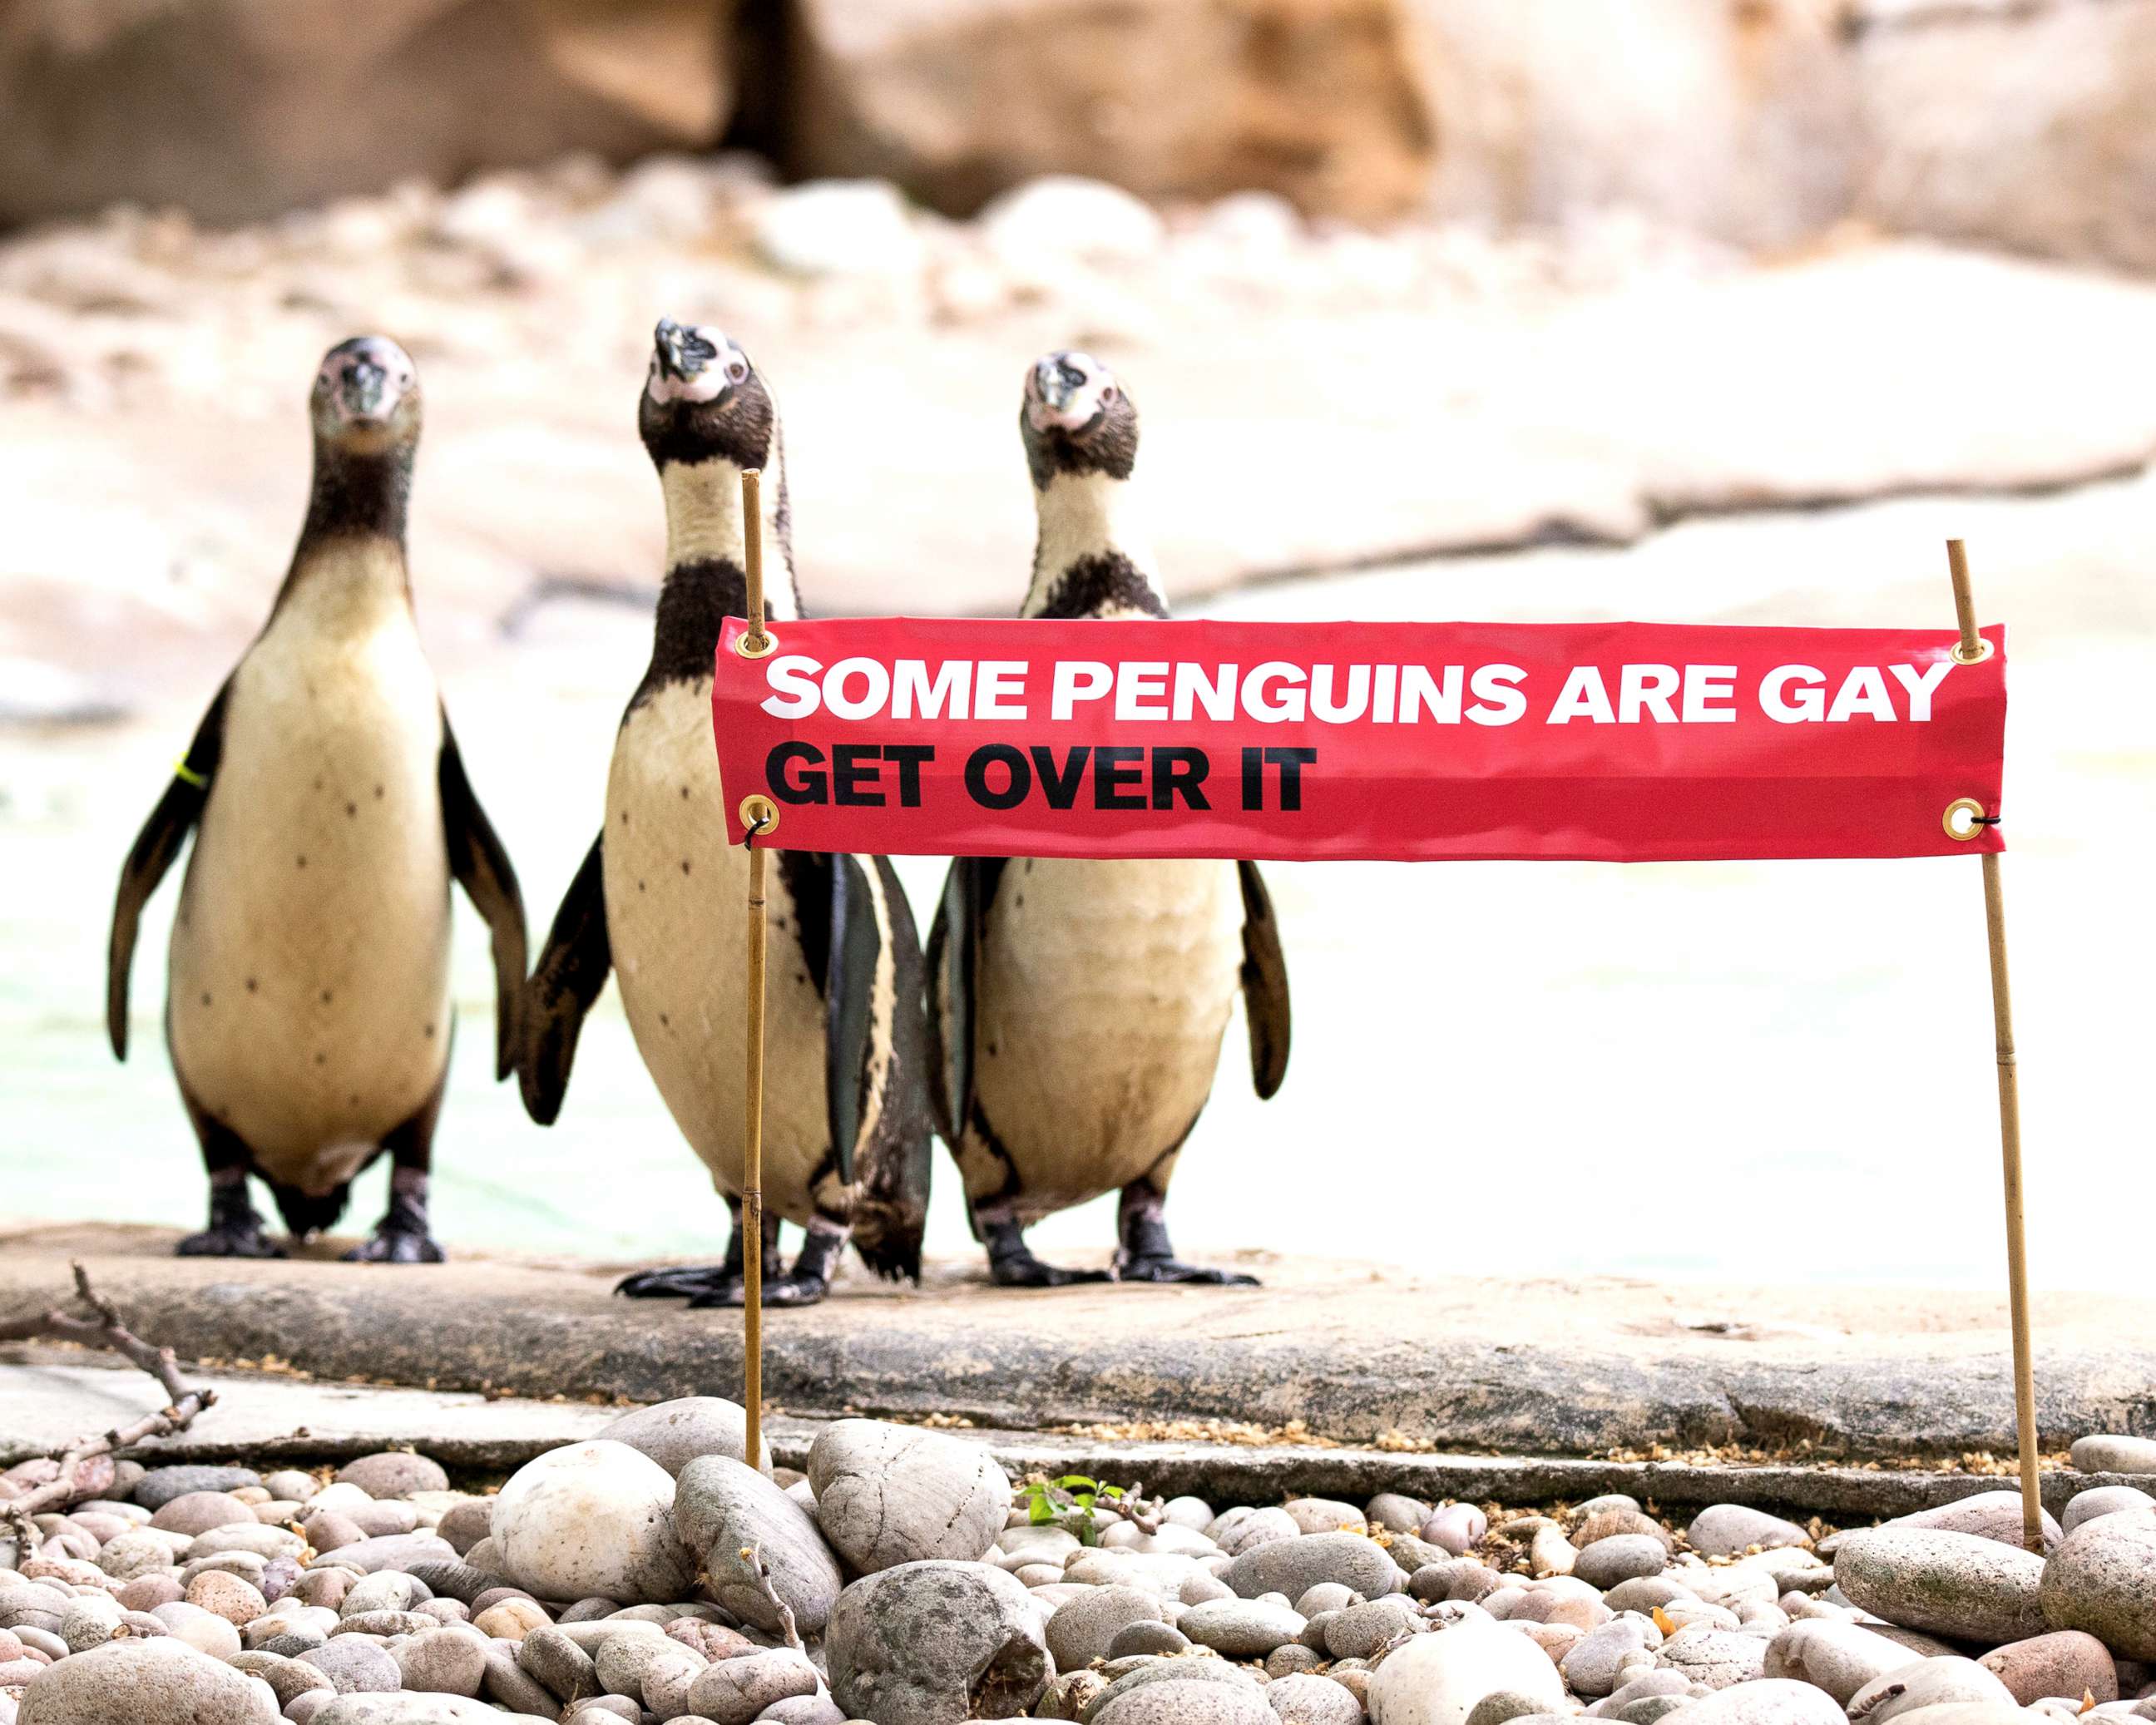 PHOTO: Penguins at ZSL London Zoo are pictured with a banner celebrating Pride.